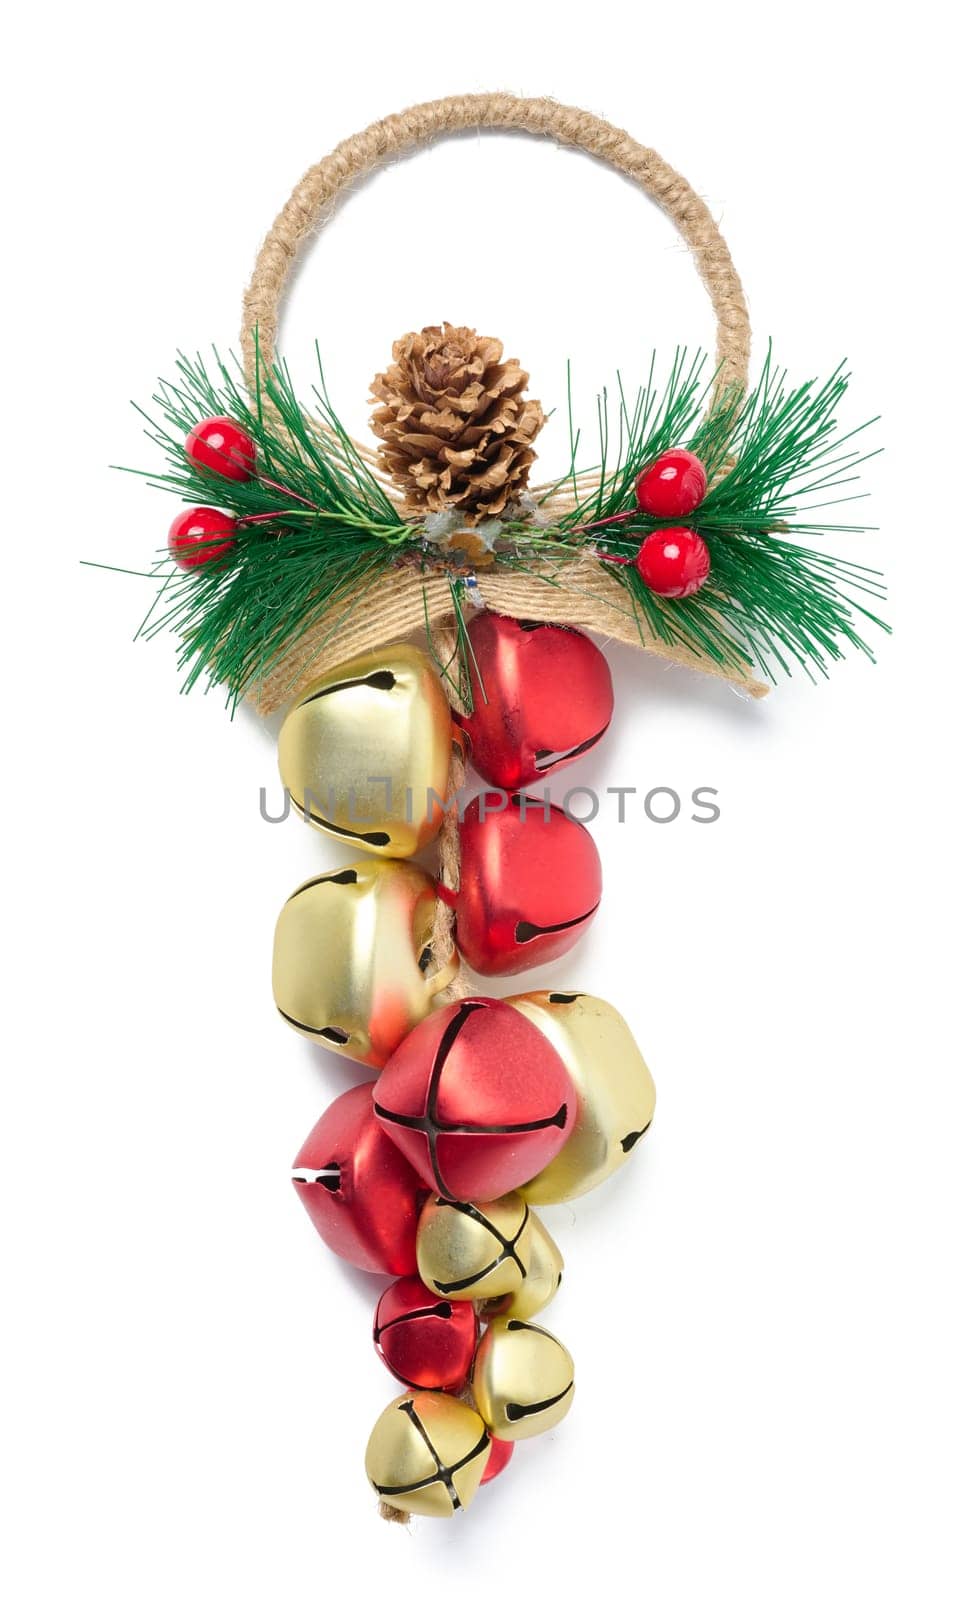 Decorative Christmas garland with bells on a white background by ndanko